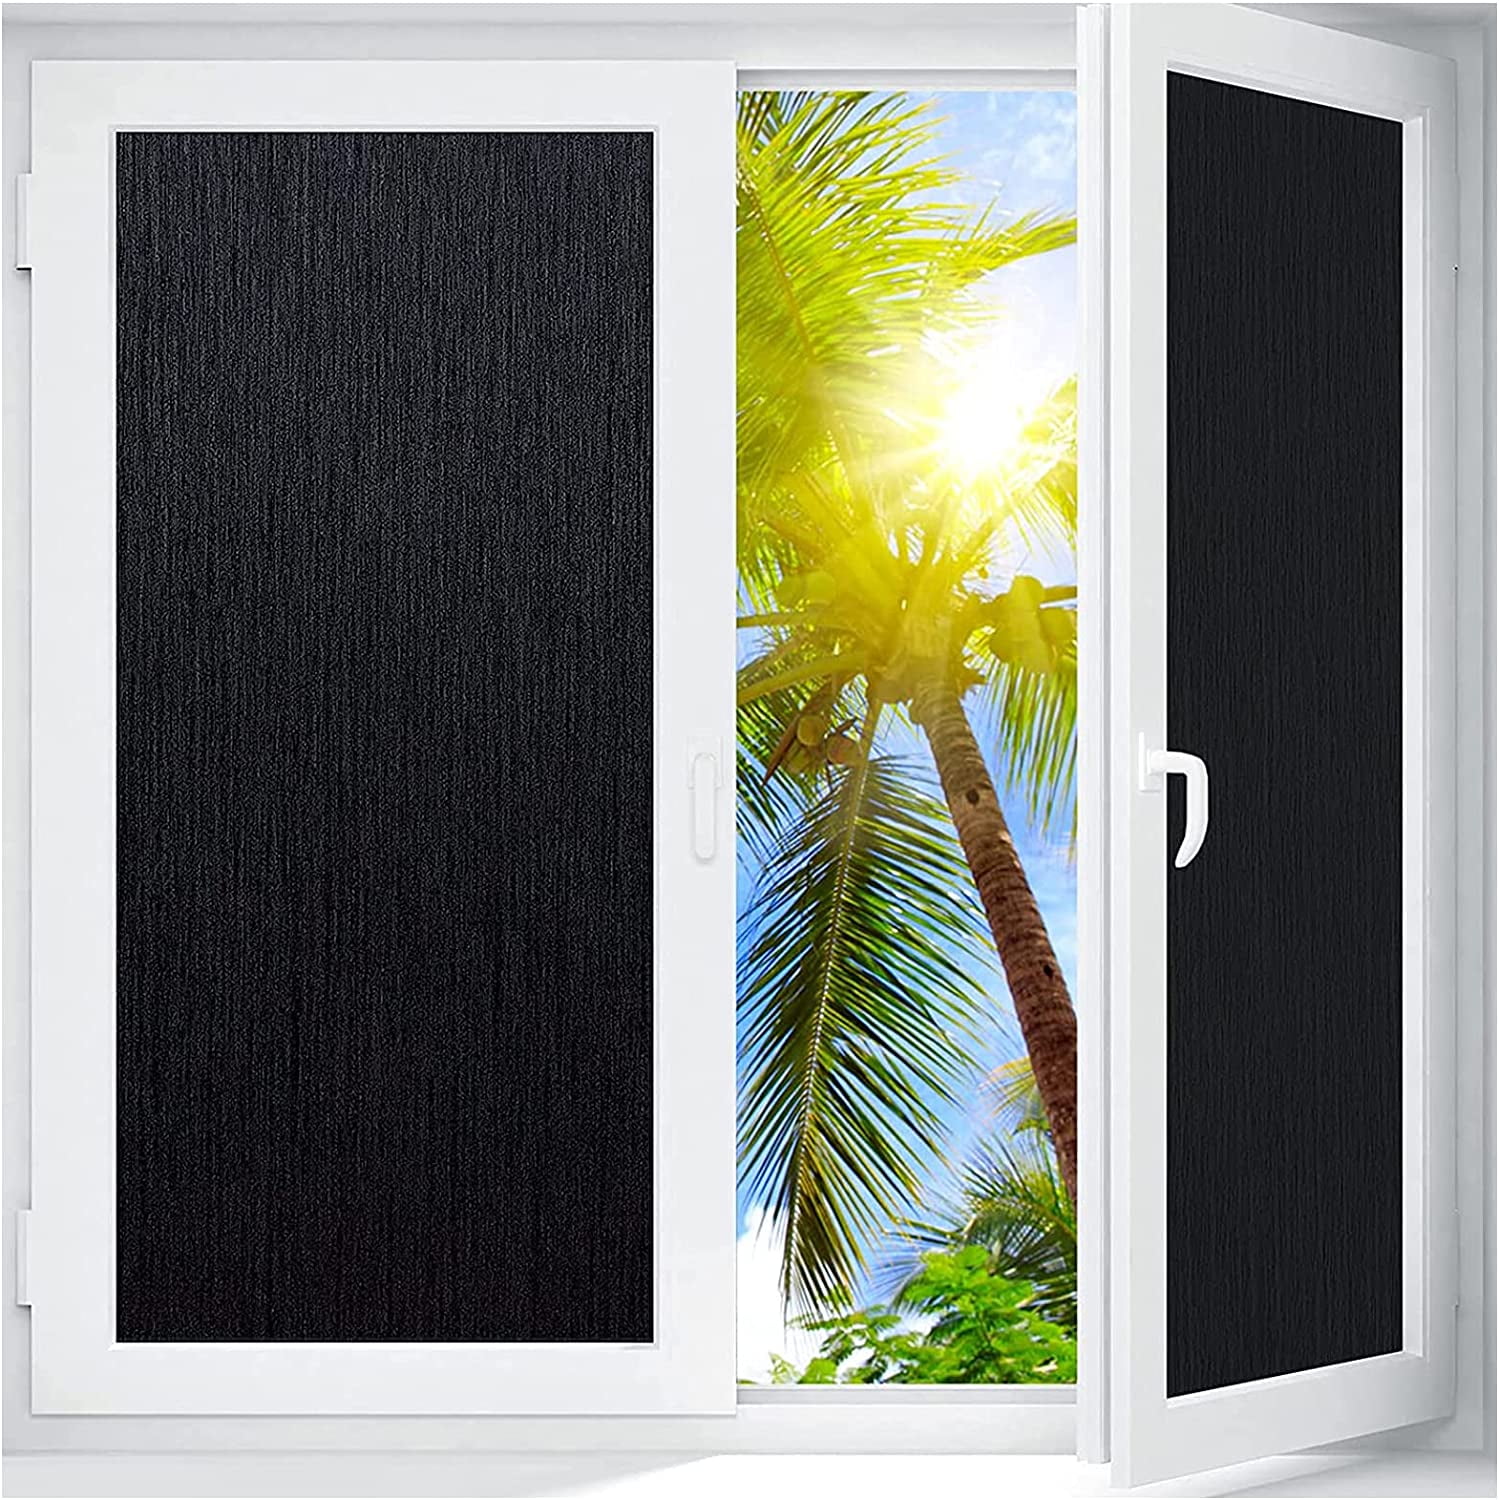 Glossy Blackout Window Film Static Cling Privacy Block Sun UV Protection Big Cut 